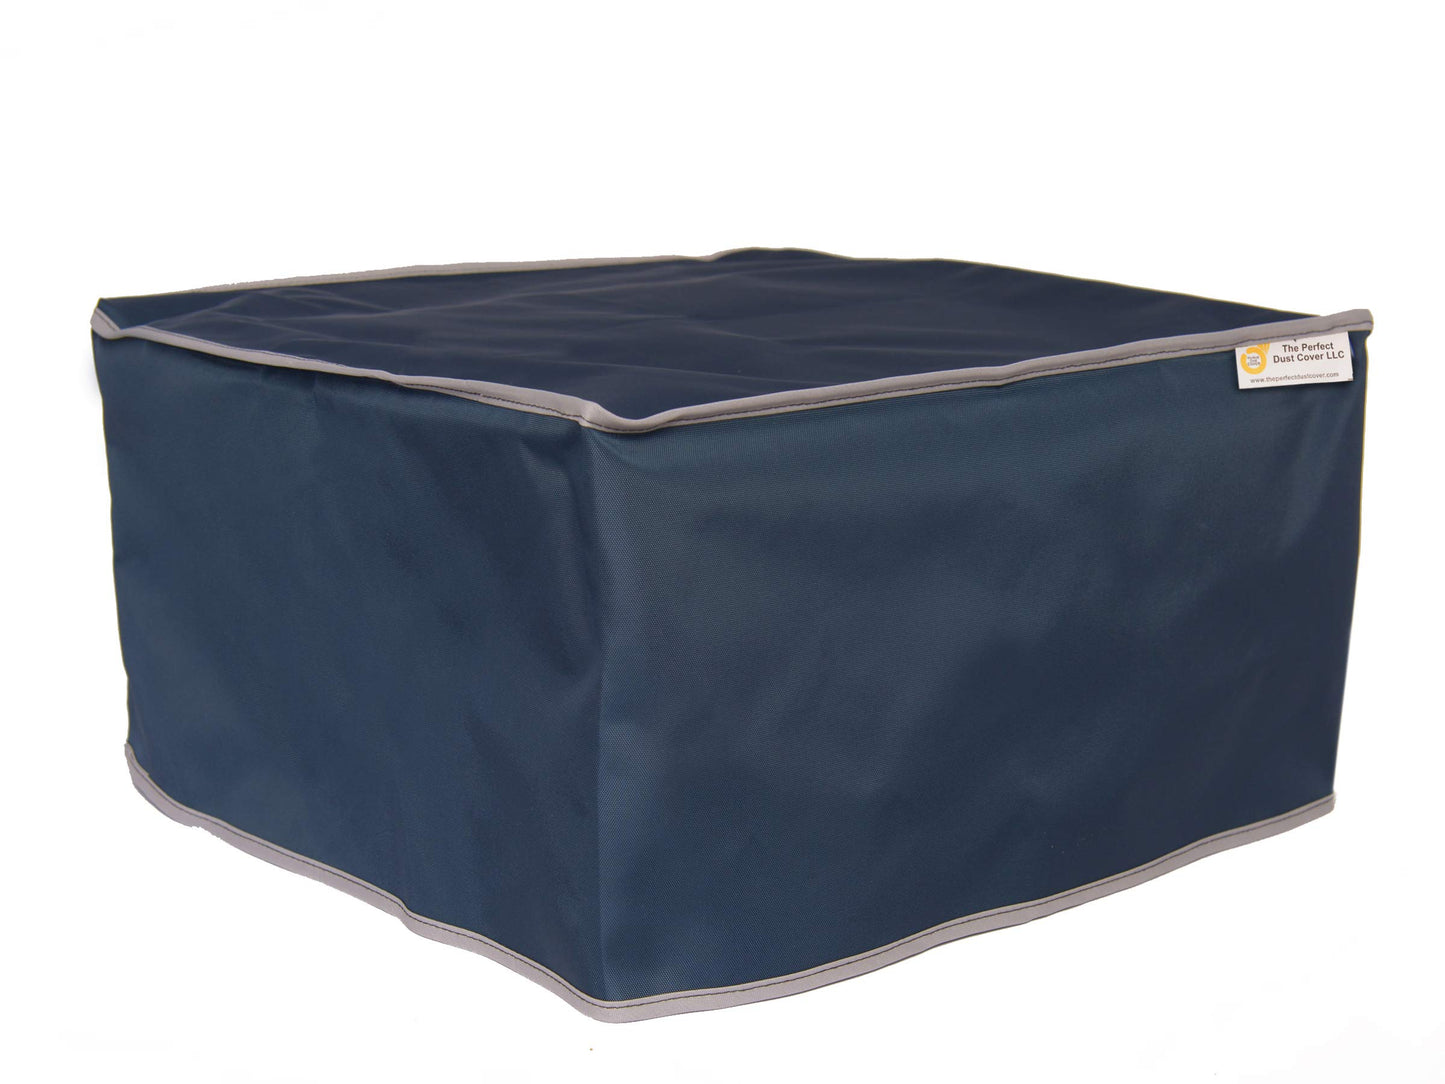 The Perfect Dust Cover, Navy Blue Nylon Short Cover for HP DesignJet Z6 44-in Postscript Printer, Anti Static Waterproof, Dimensions 71''W x 27.4''D x 14''H by The Perfect Dust Cover LLC